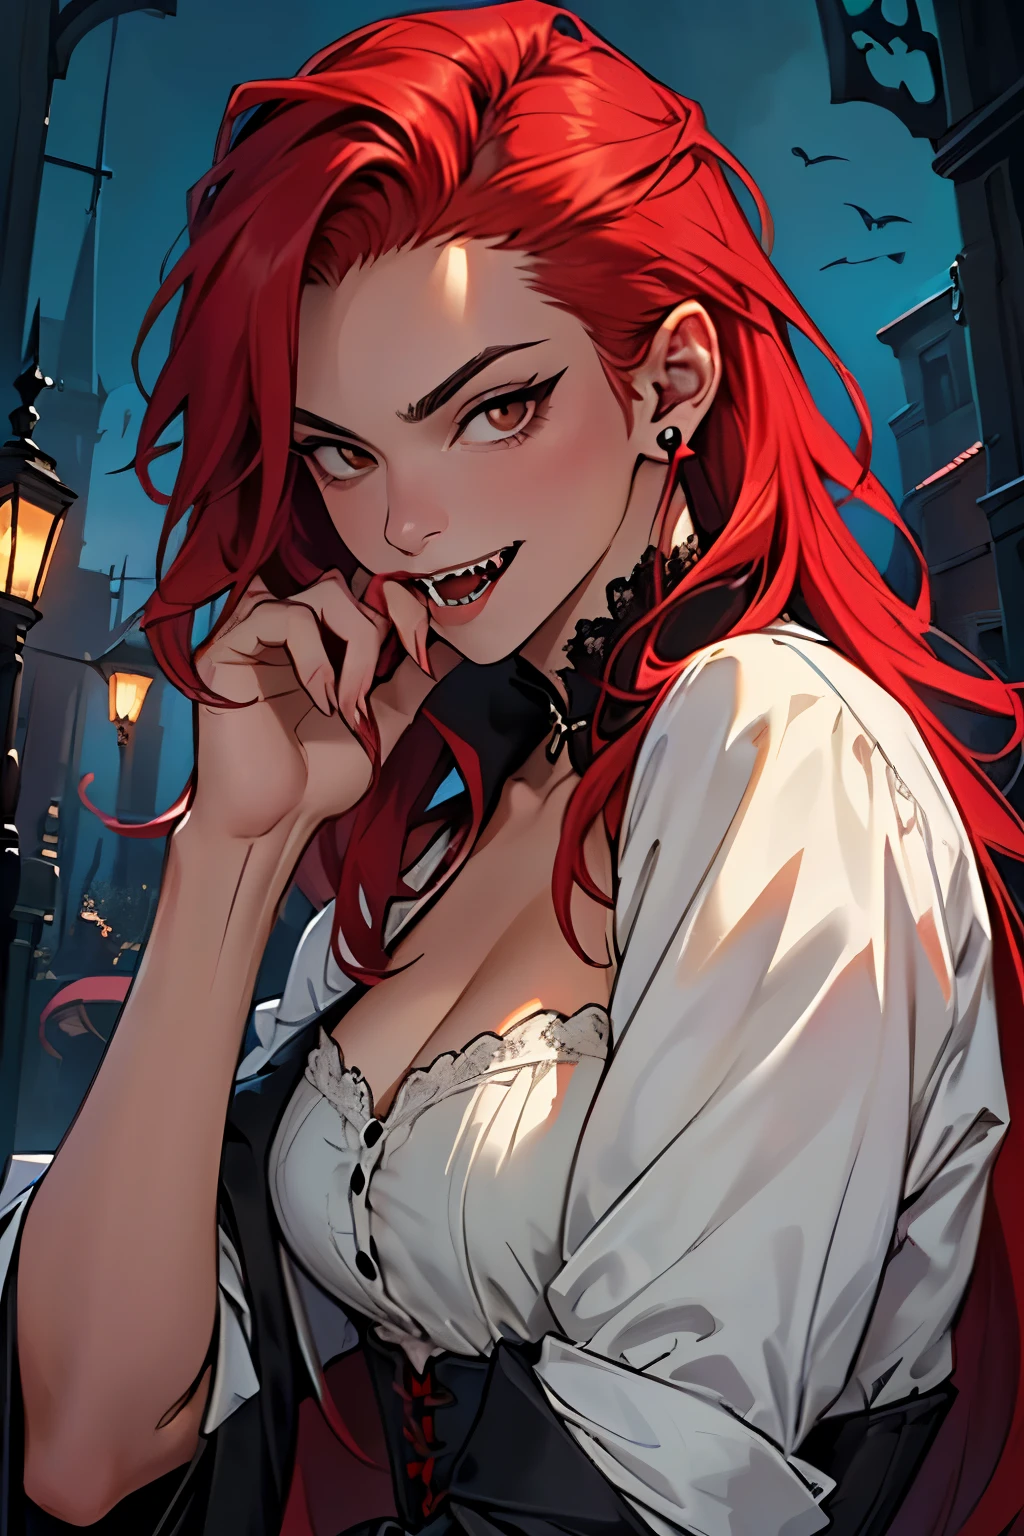 ((best quality)), ((masterpiece)), (detailed), ((ONE VAMPIRE)), ((PERFECT FACE)), ((PERFECT BODY)), ((PERFECT HAND )), ((PERFECT EAR)), ((PERFECT NOSE)), ((perfect mouth)), (( SKINNY)) ((RED HAIR)), ((LARGE FANGS)), ((PERFECT BROWN EYES)), ((LOOK, SEDUCTIVE)) night